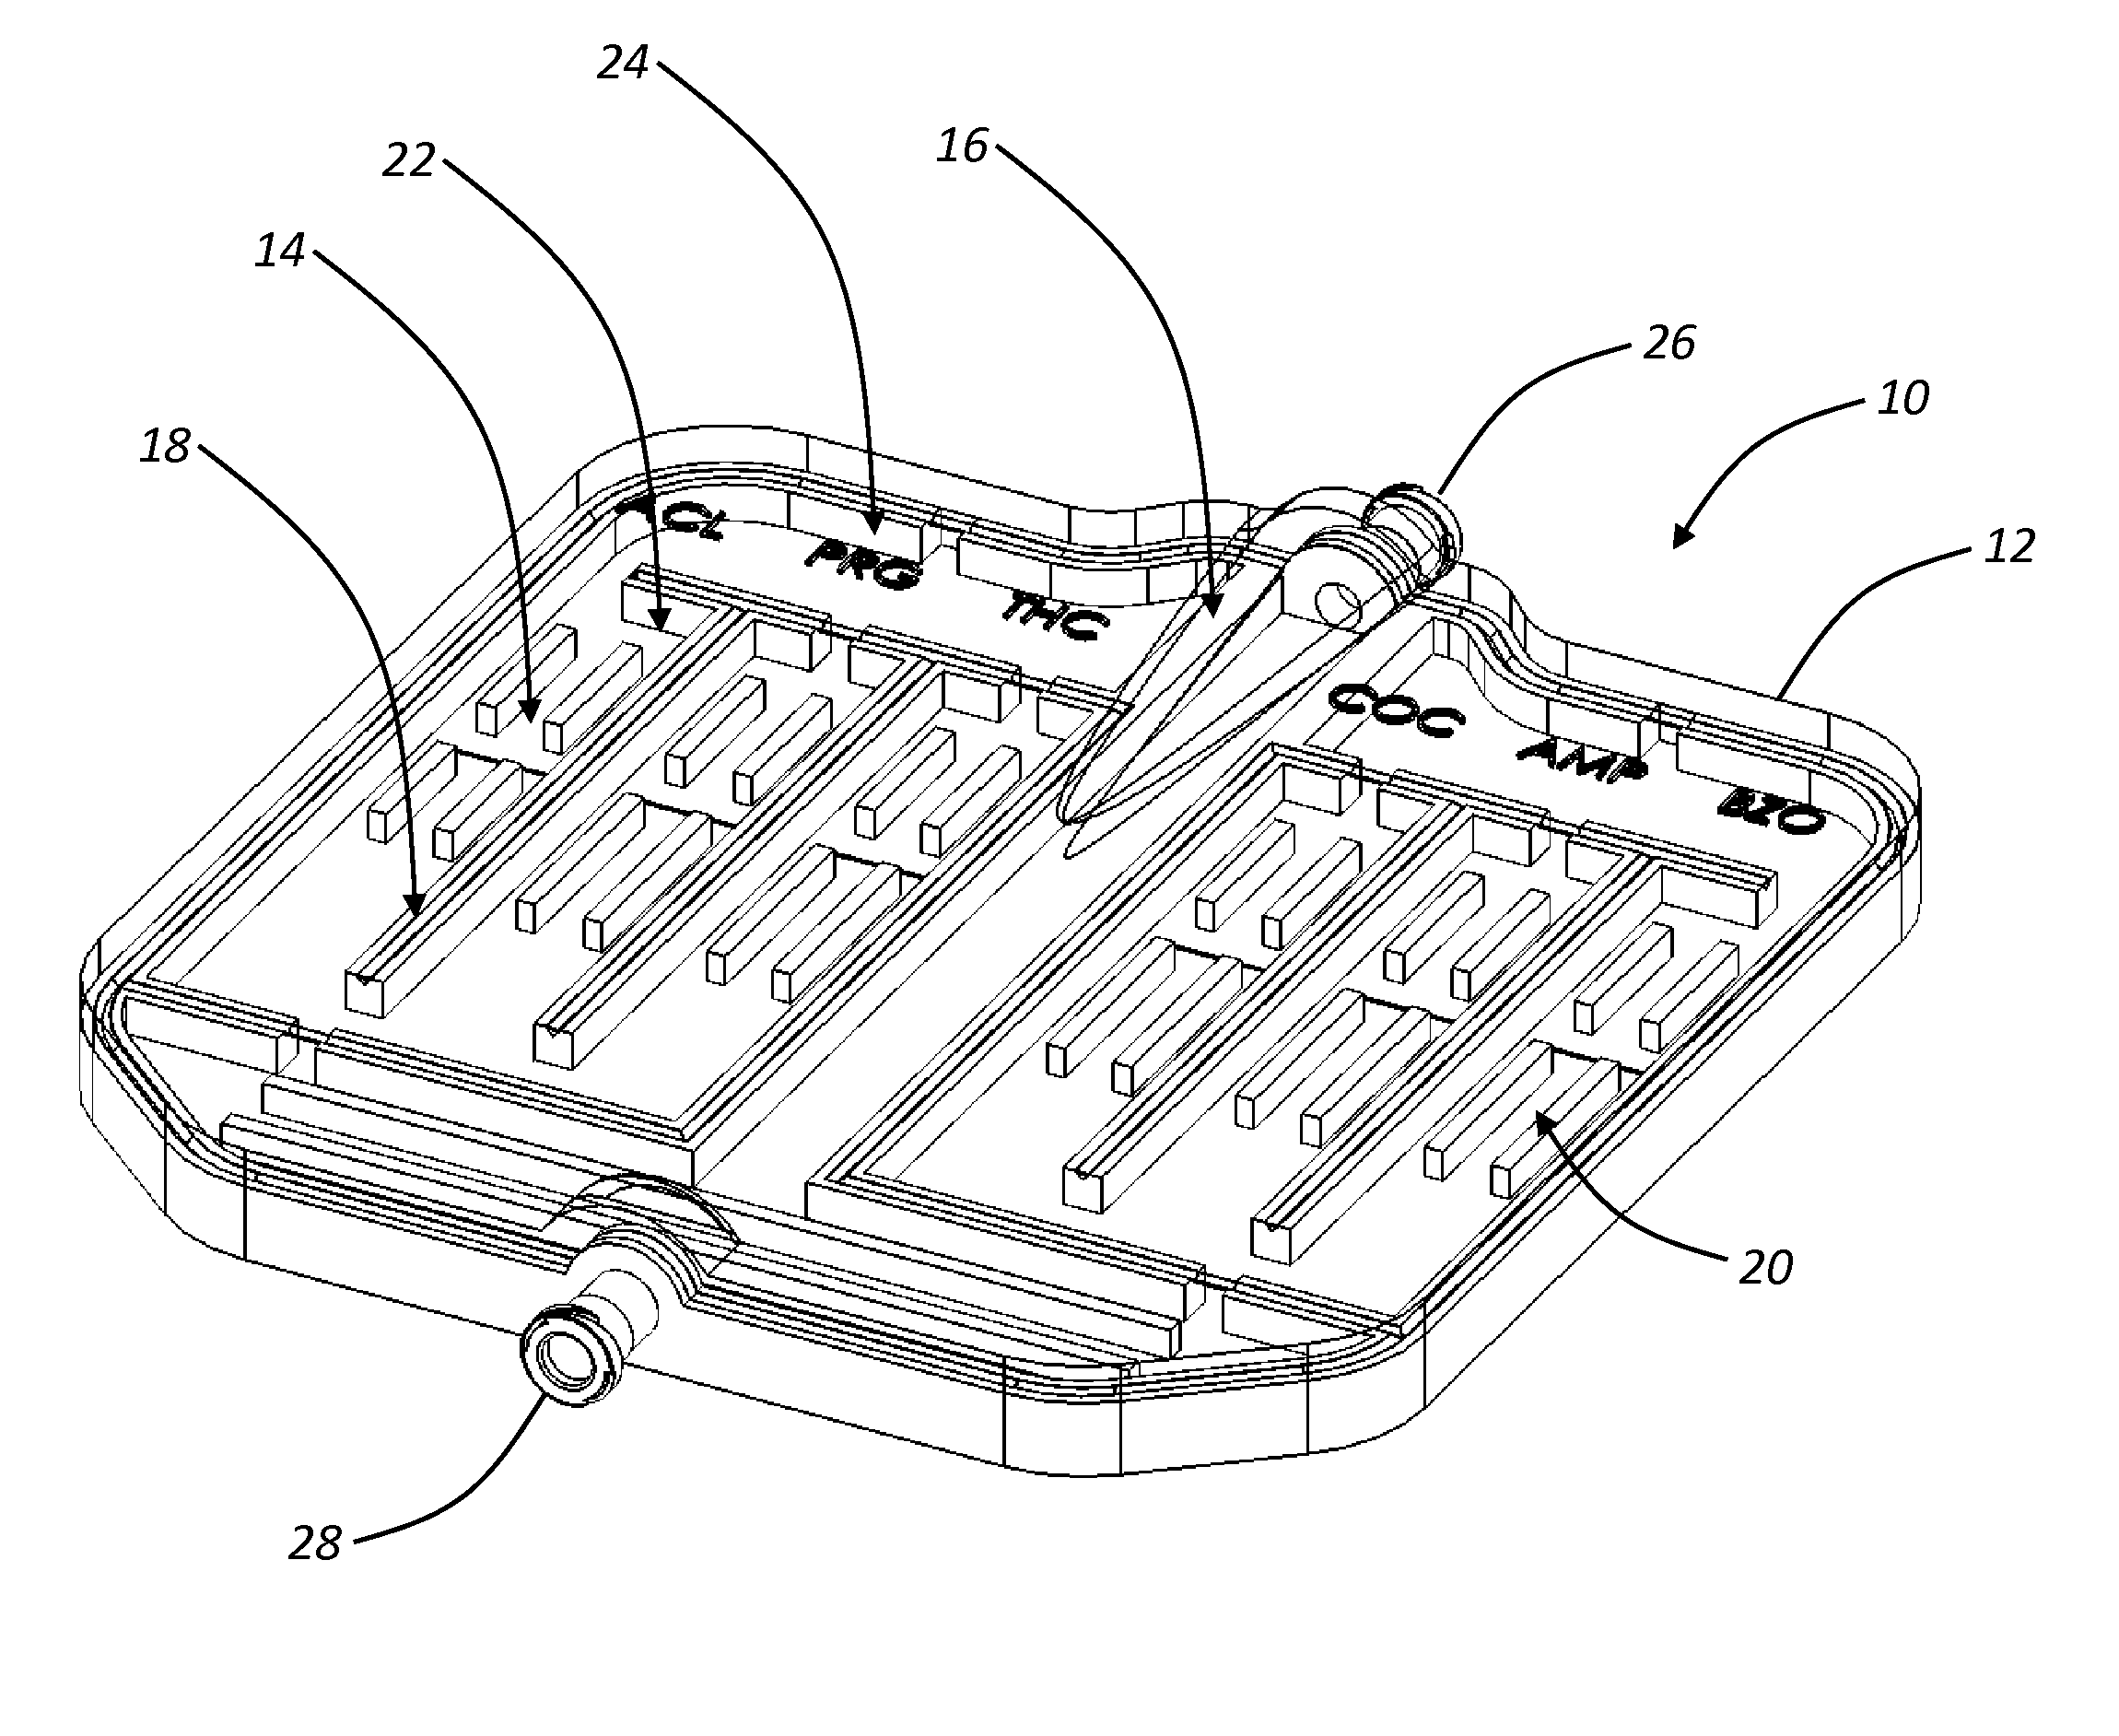 Urine test device incorporating urinary catheter or urinary bag attachment device and associated method of use